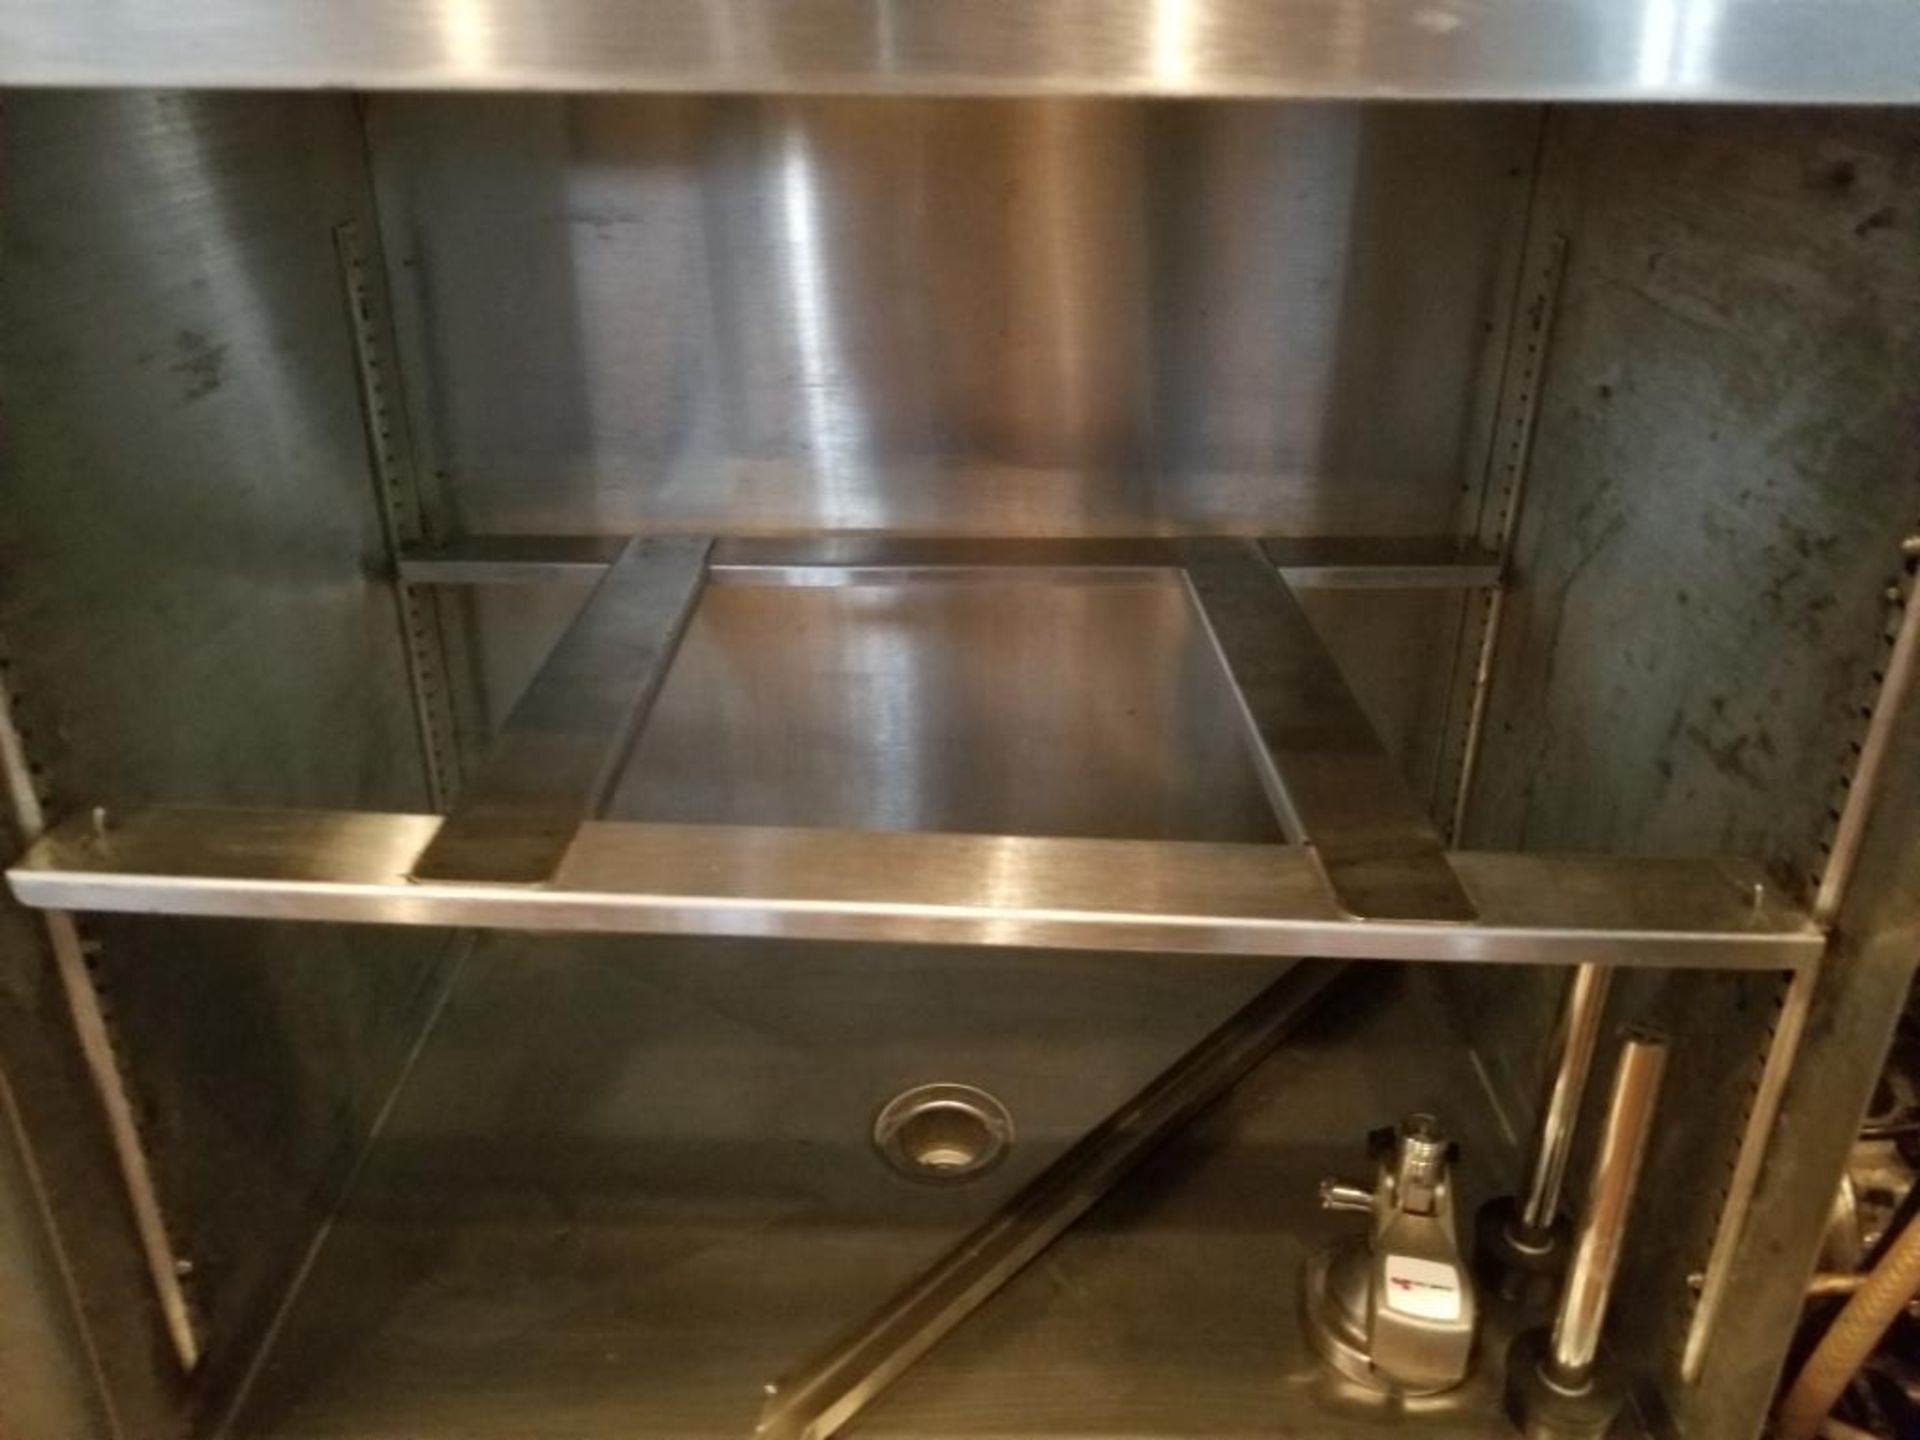 Atlas Restaurant Supply stainless steel prep table. 24" x 18" x 30". - Image 2 of 6